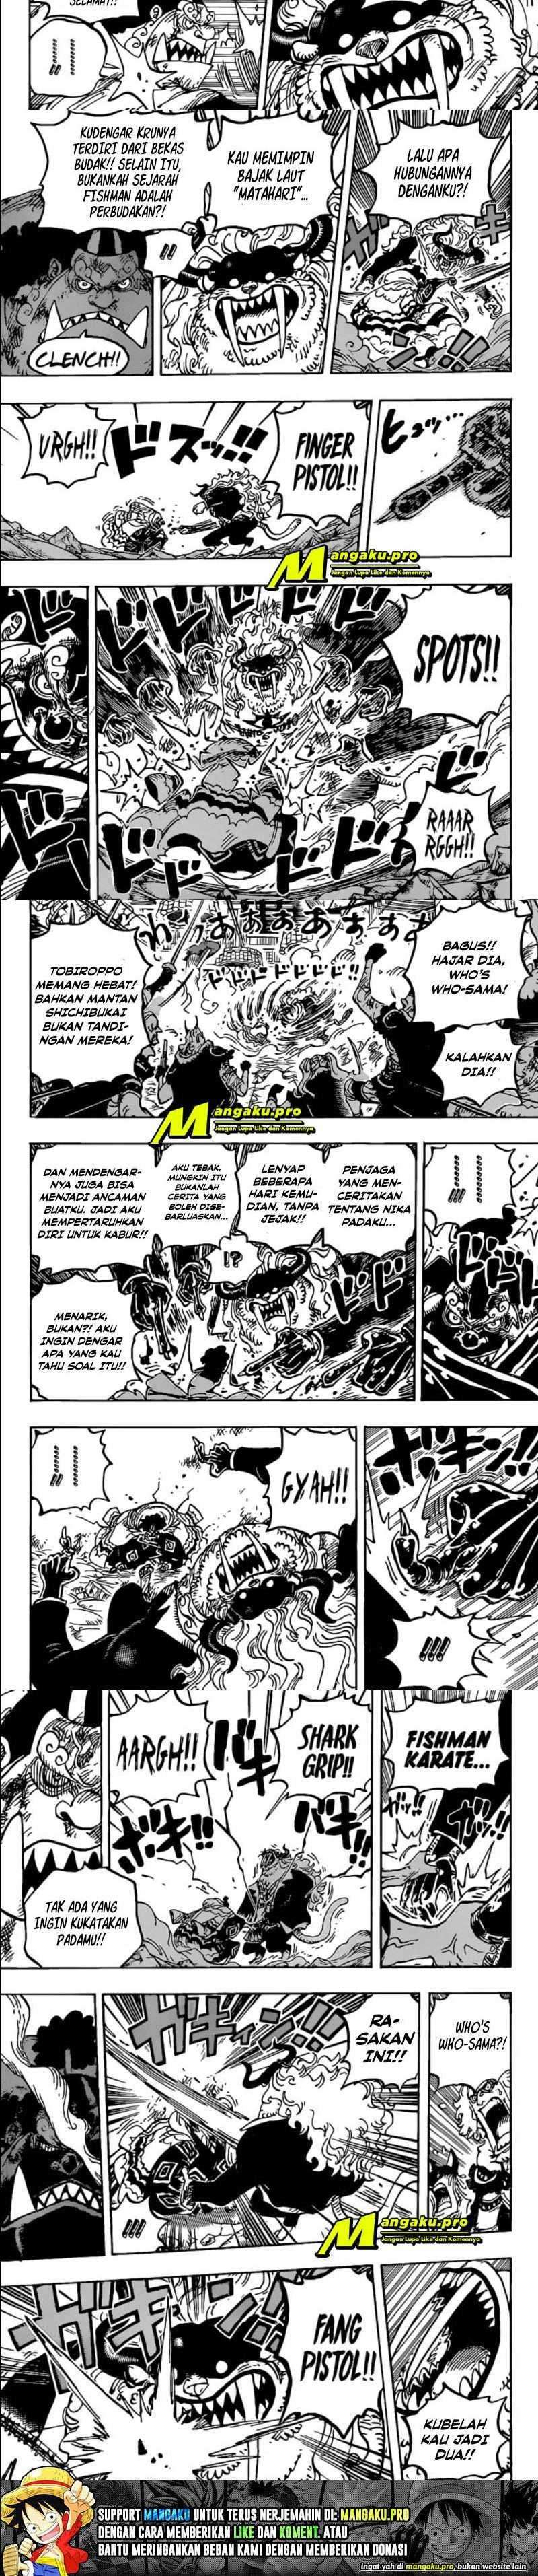 One Piece Chapter 1018 Hq - 37